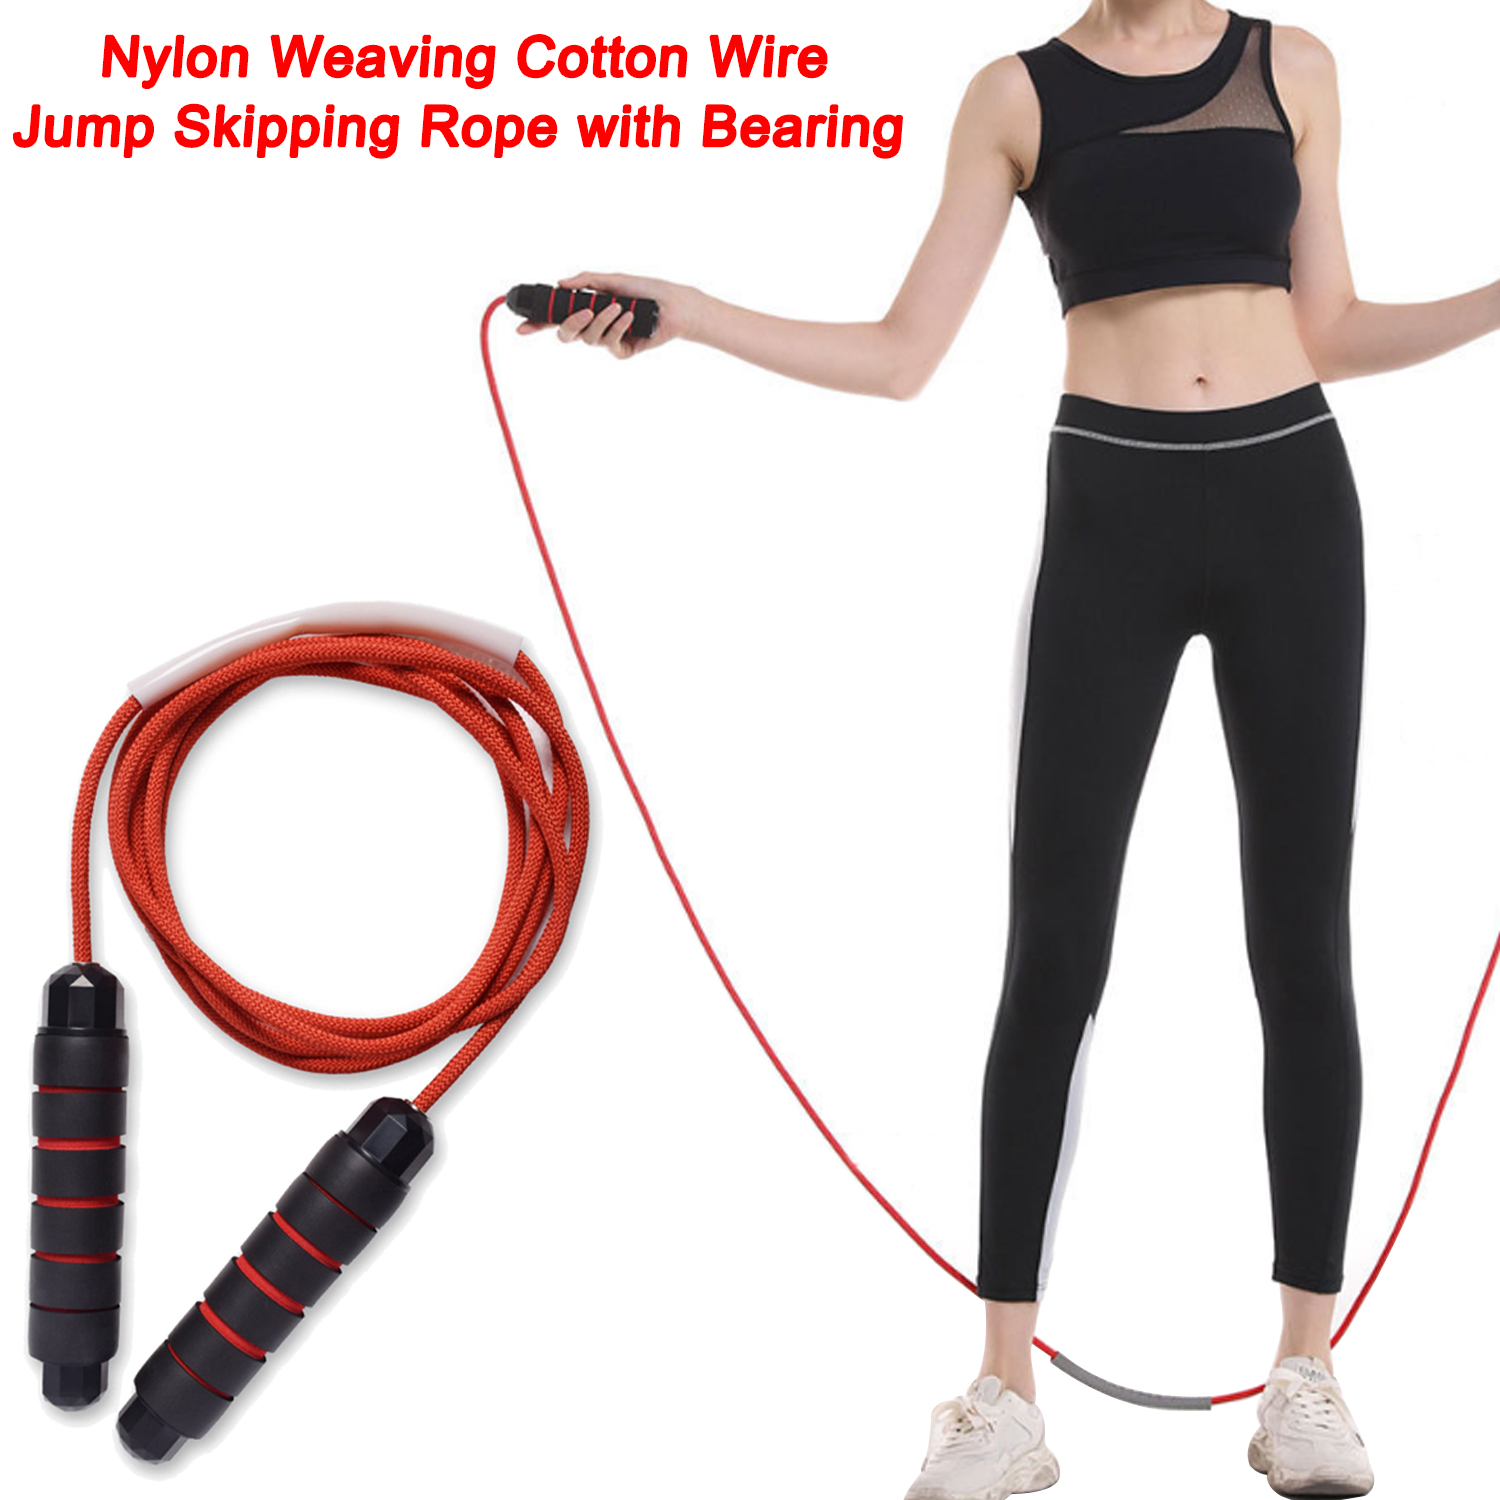 Adjustable 3M Length 6MM Diameter Nylon Weaving Cotton Wire Jump Skipping Rope with Bearing